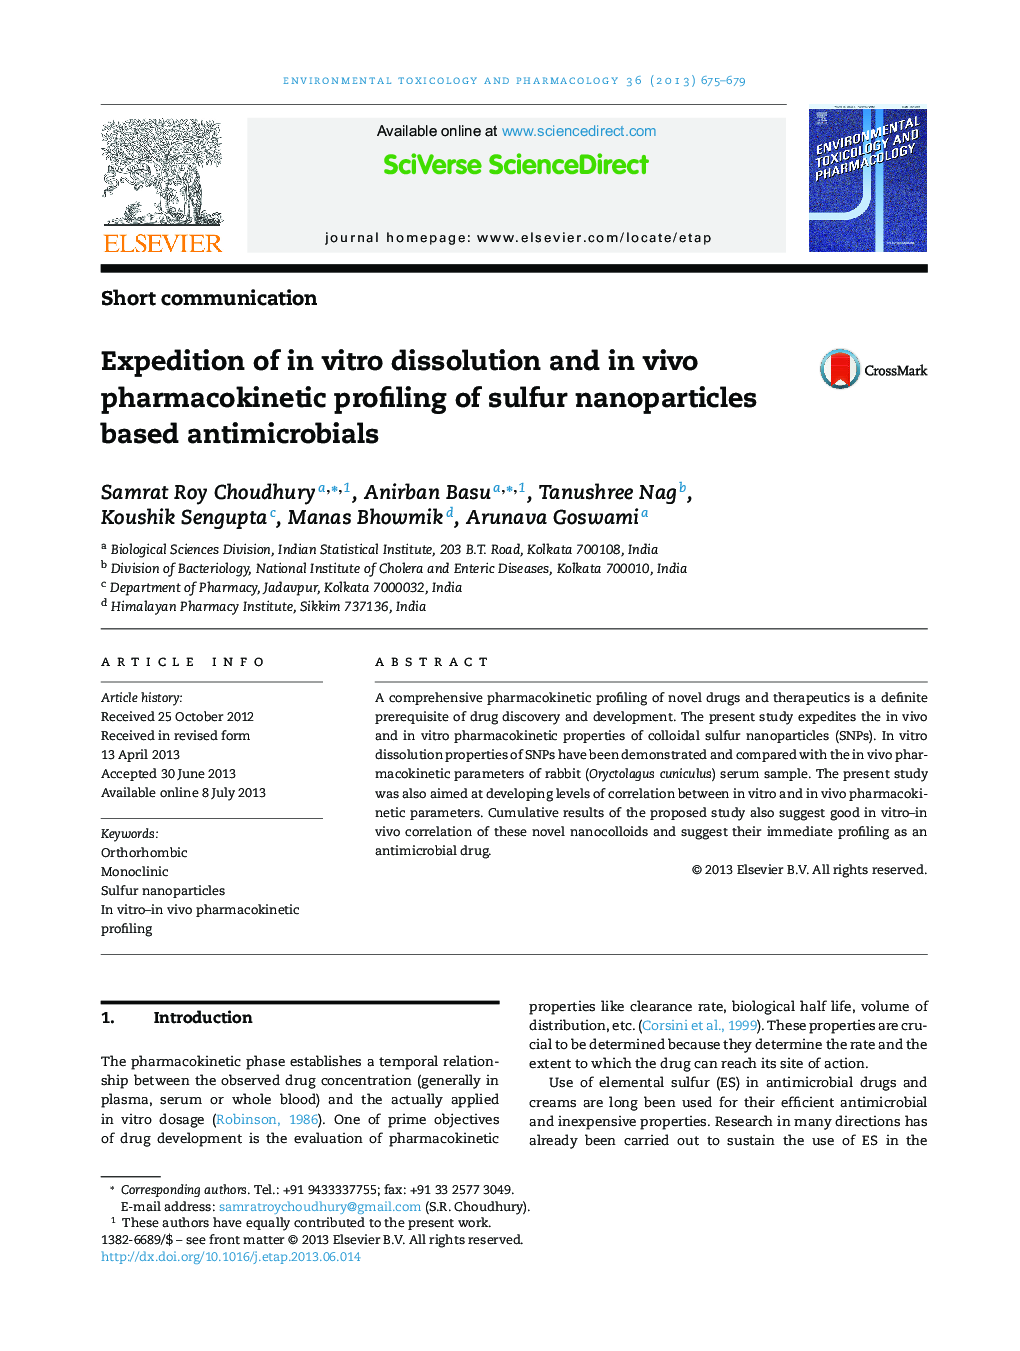 Short communicationExpedition of in vitro dissolution and in vivo pharmacokinetic profiling of sulfur nanoparticles based antimicrobials